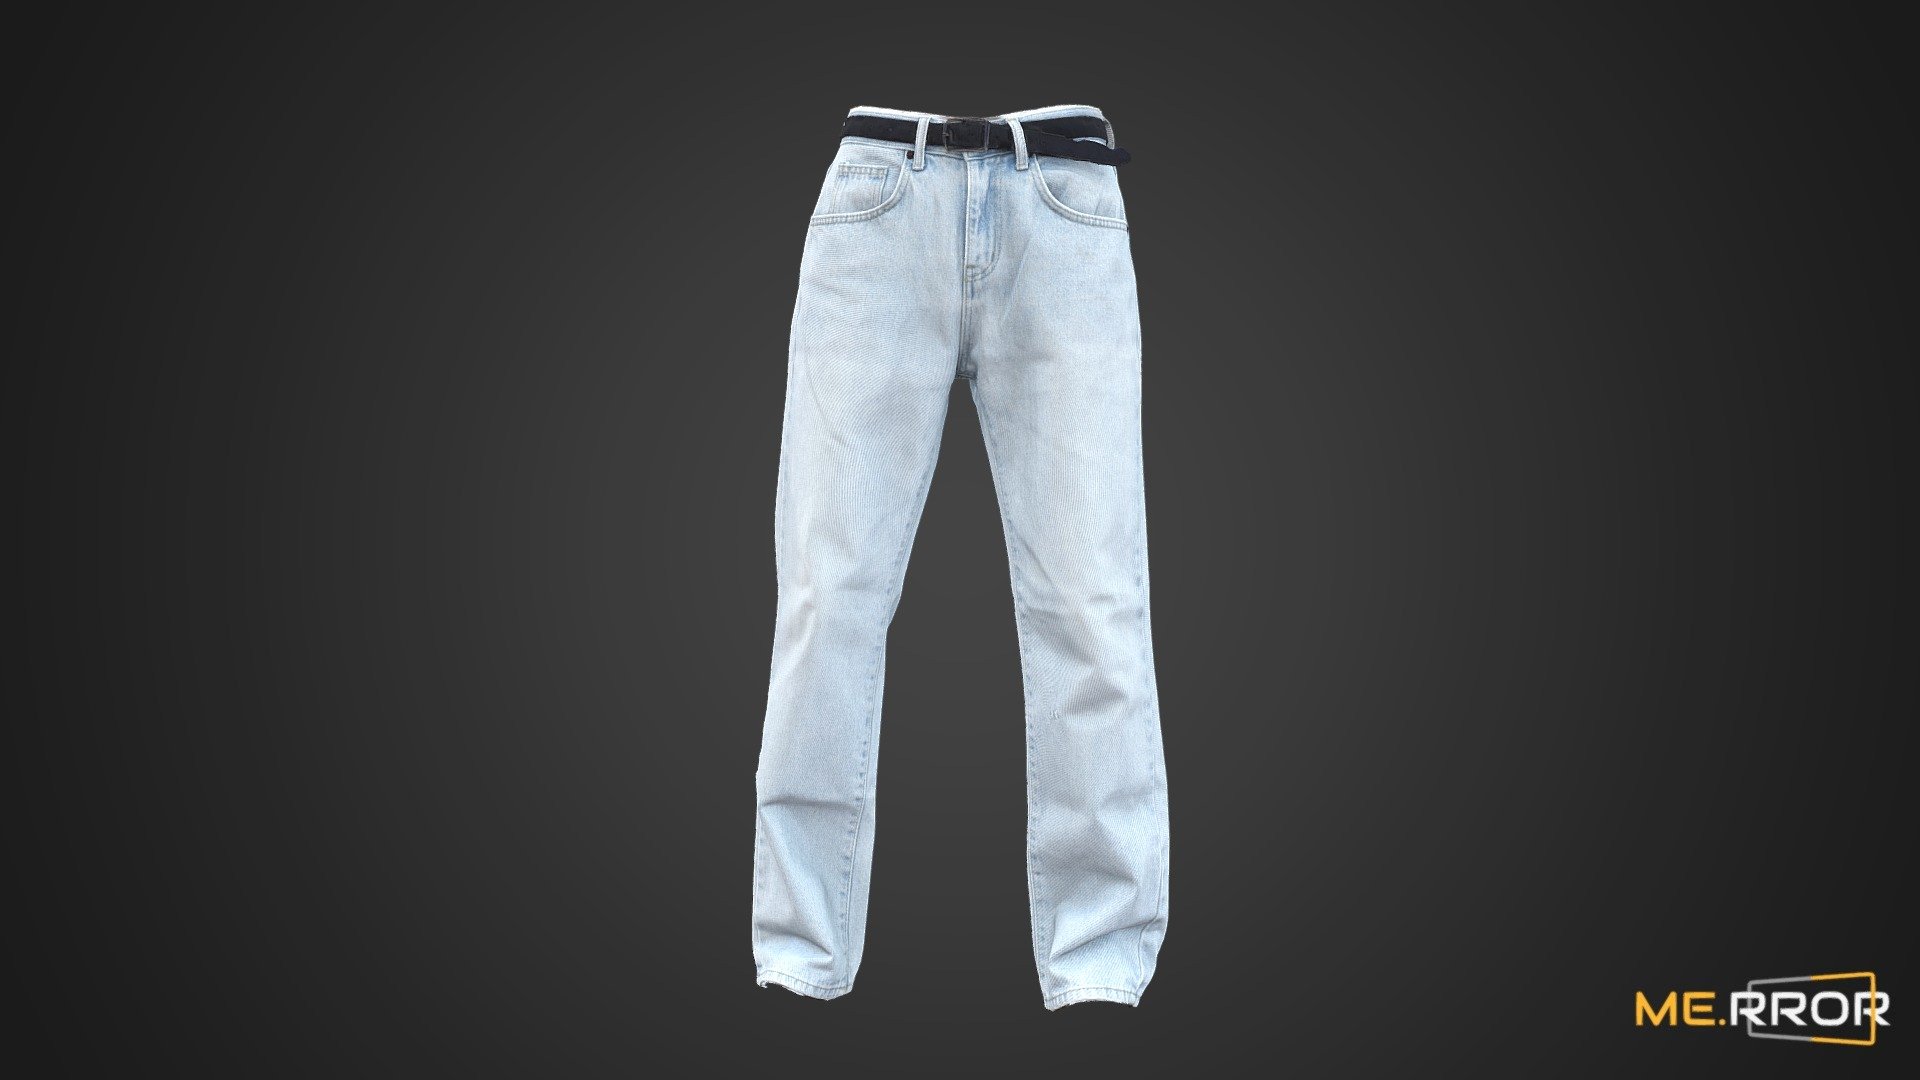 MERROR is a 3D Content PLATFORM which introduces various Asian assets to the 3D world


3DScanning #Photogrametry #ME.RROR - Light Blue Jeans and Belt - Buy Royalty Free 3D model by ME.RROR (@merror) 3d model